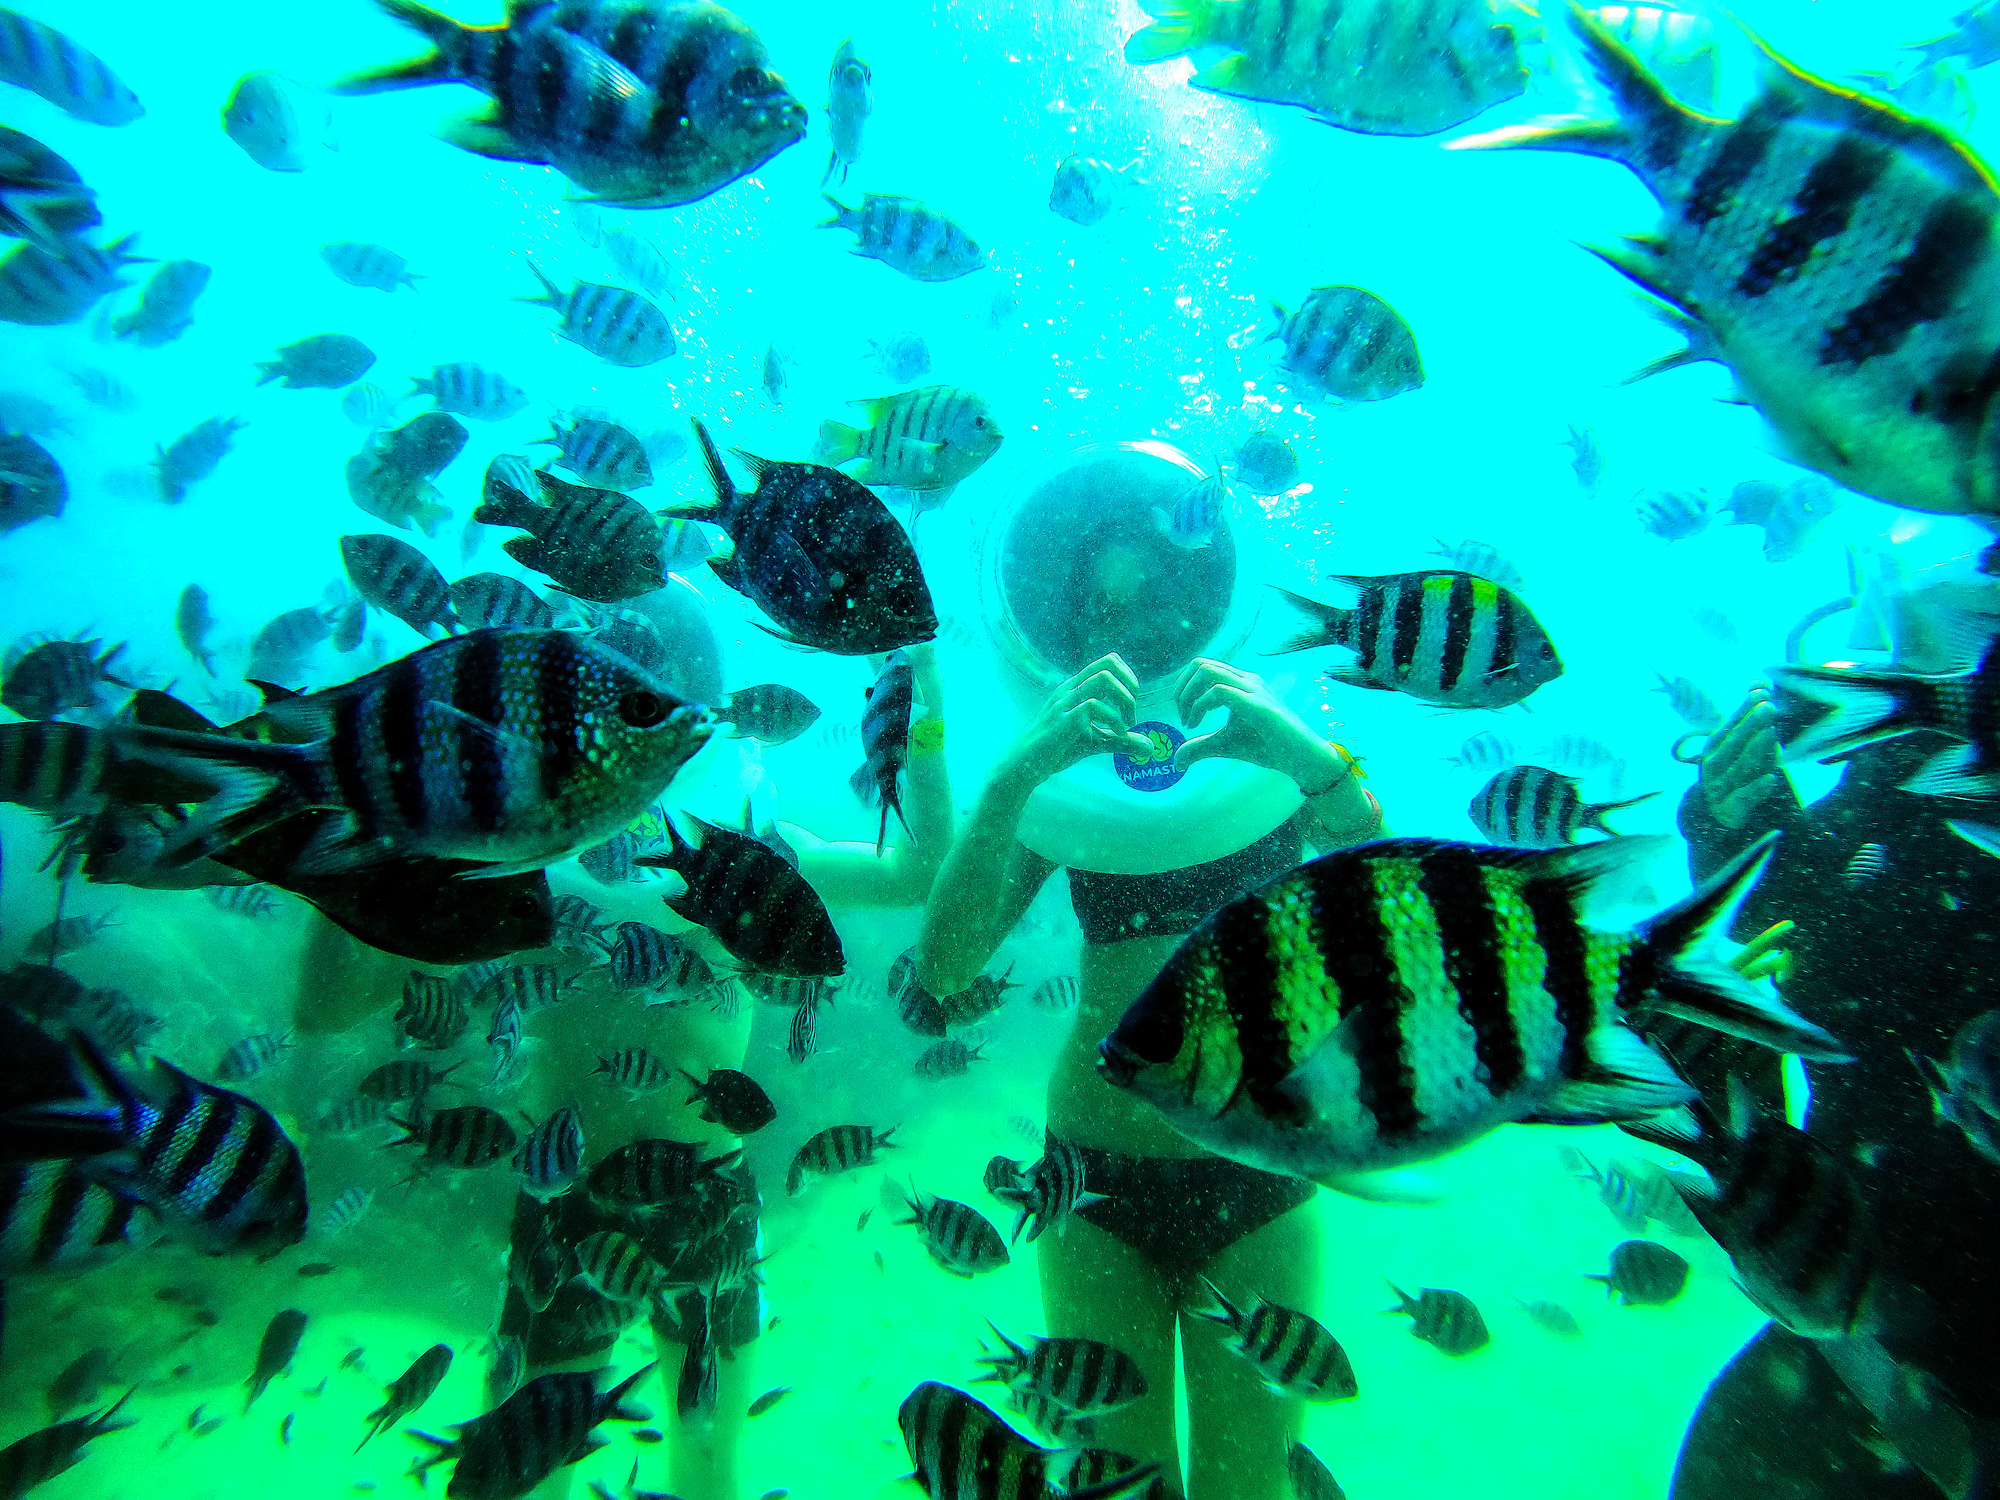 A tourist poses for a photo among schools of fish in the waters of Phu Quoc island in Kien Giang Province, southern Vietnam. Photo: Hoang Giam / Tuoi Tre